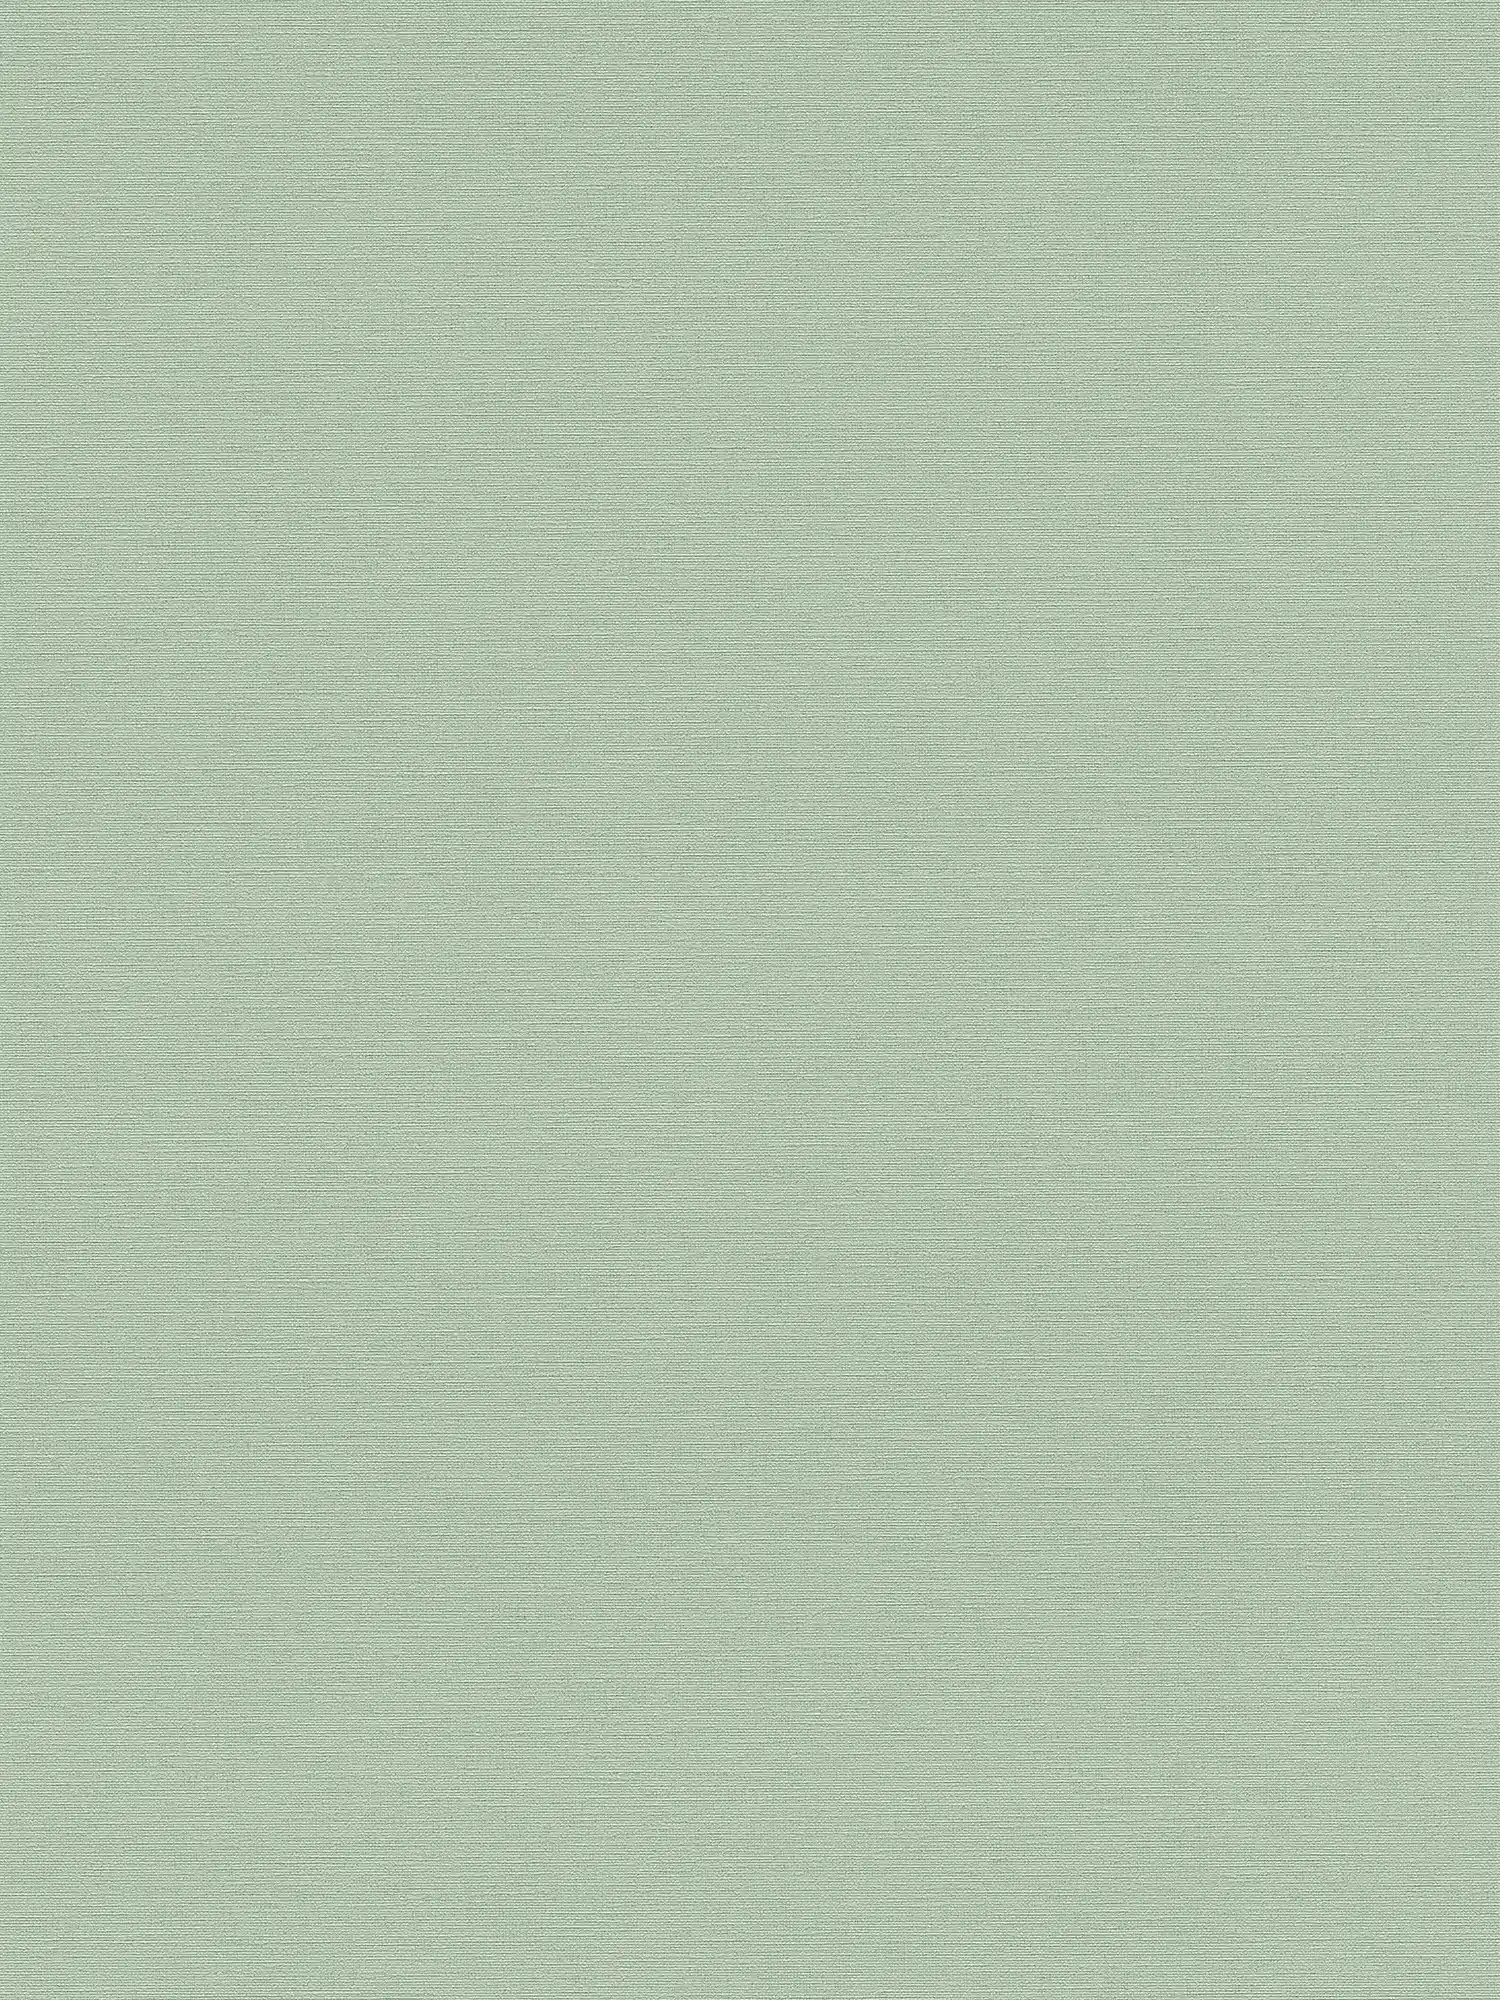 Linen look wallpaper sage green with embossed structure - green
